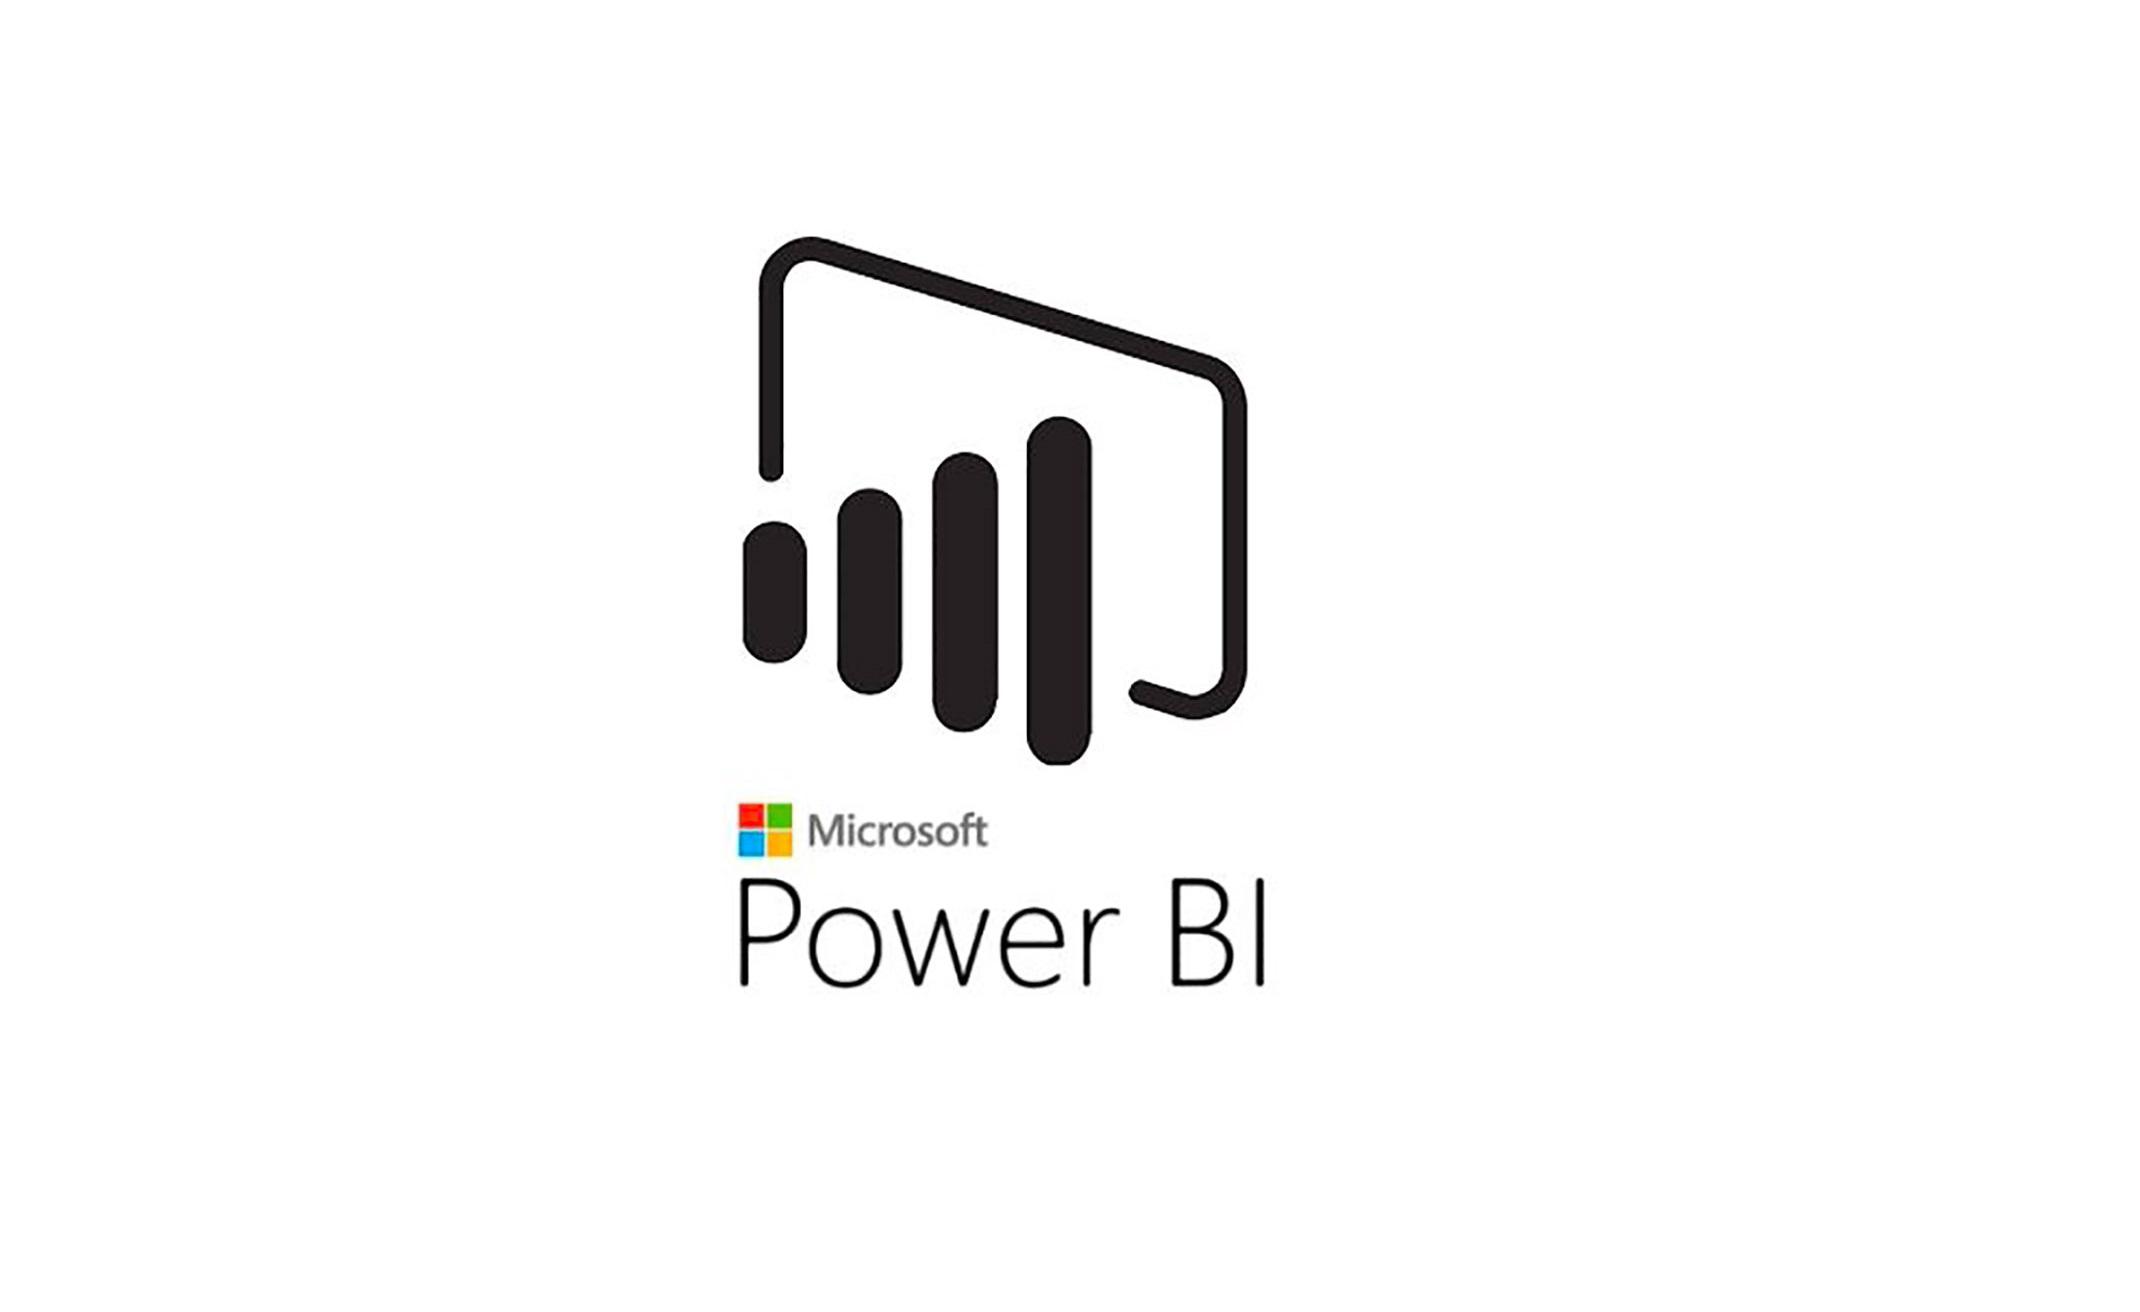 Microsoft Power BI Training in Chula Vista | Introduction to Power BI training for beginners | Getting started with Power BI | What is Power BI | January 20, 2020 - February 12, 2020